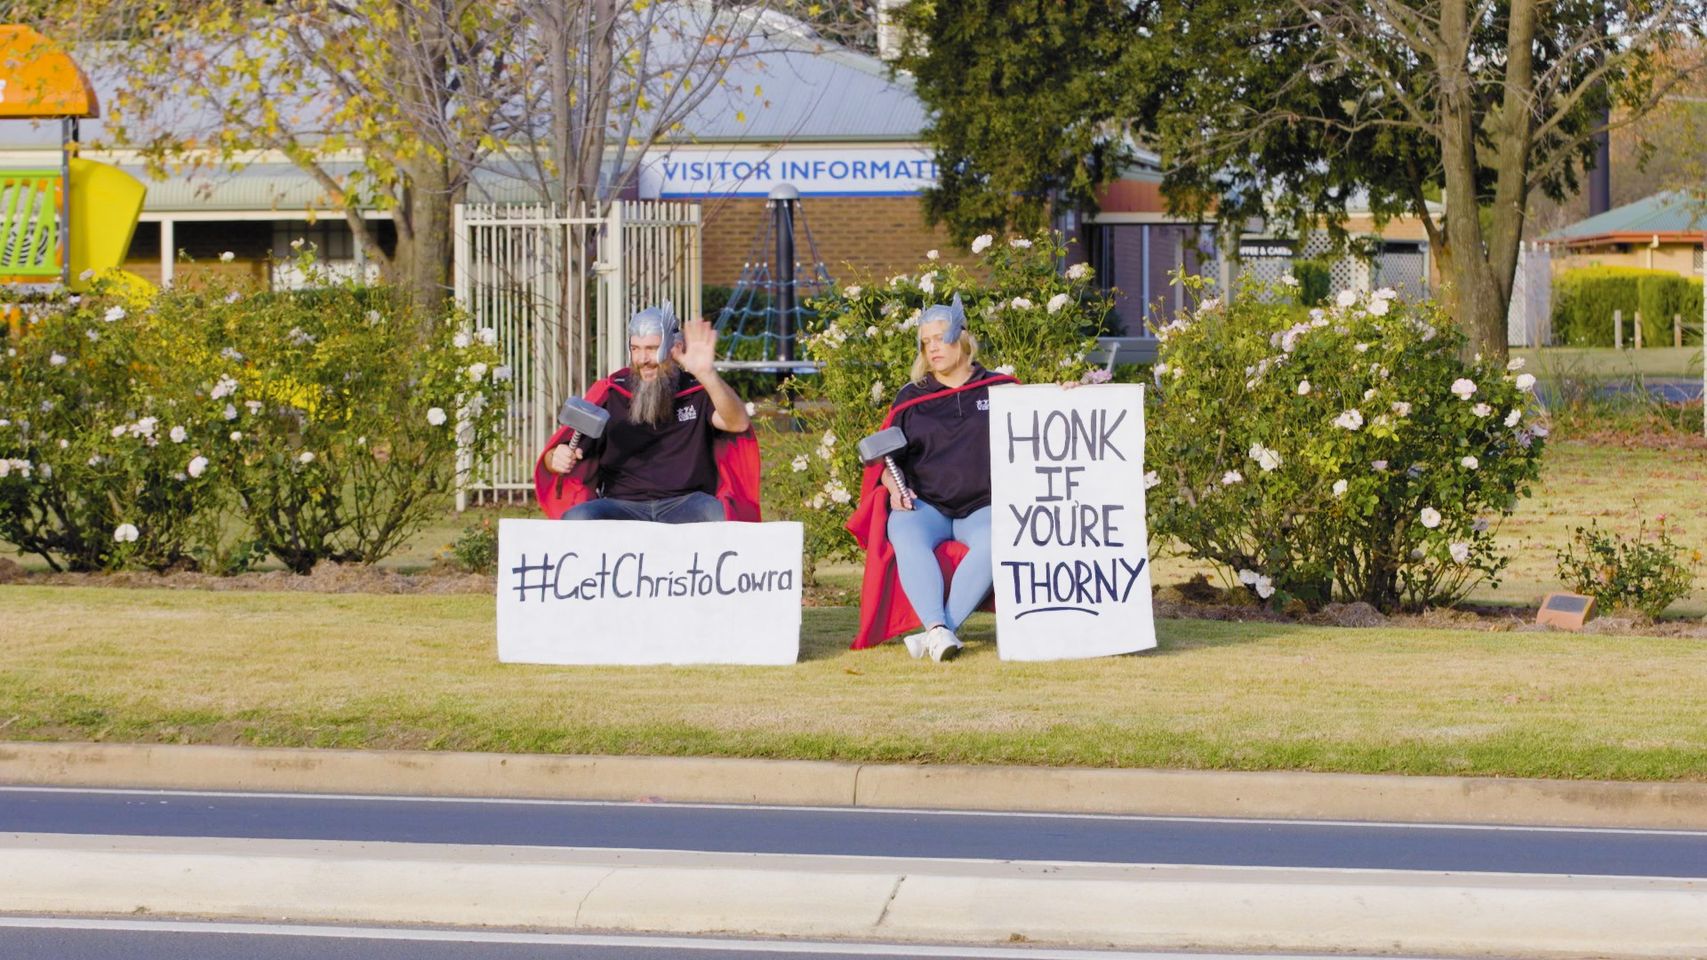 Cowra's cheeky campaign set to get Chris Hemsworth to town